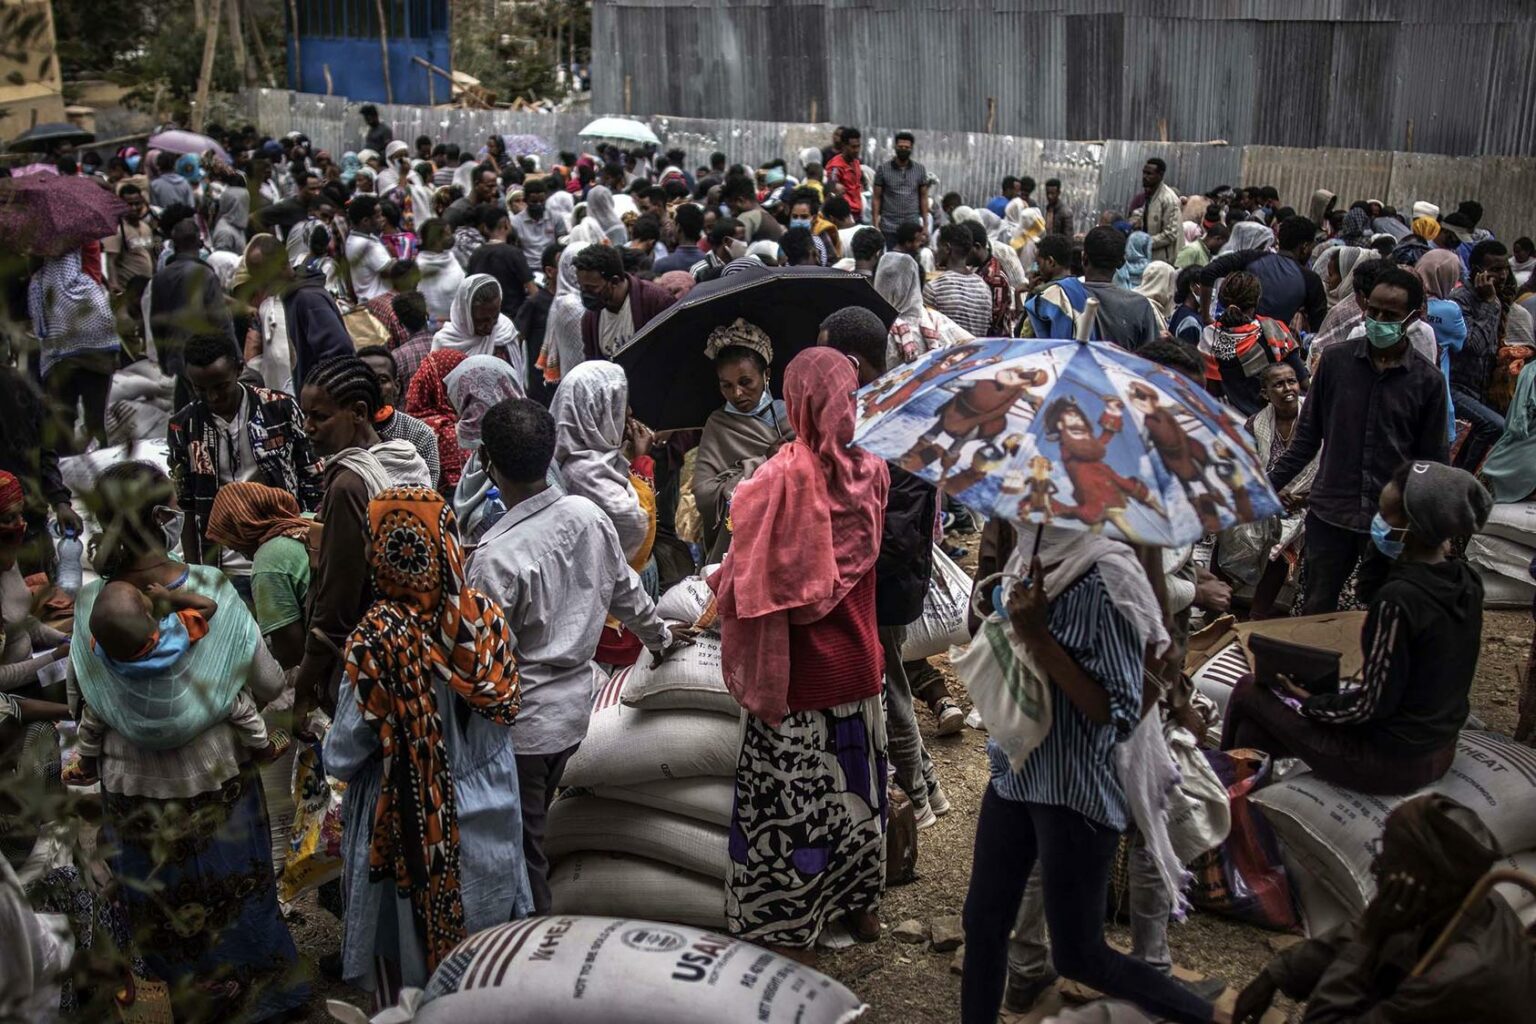 Case of immigration in Ethiopia: why do people flee?